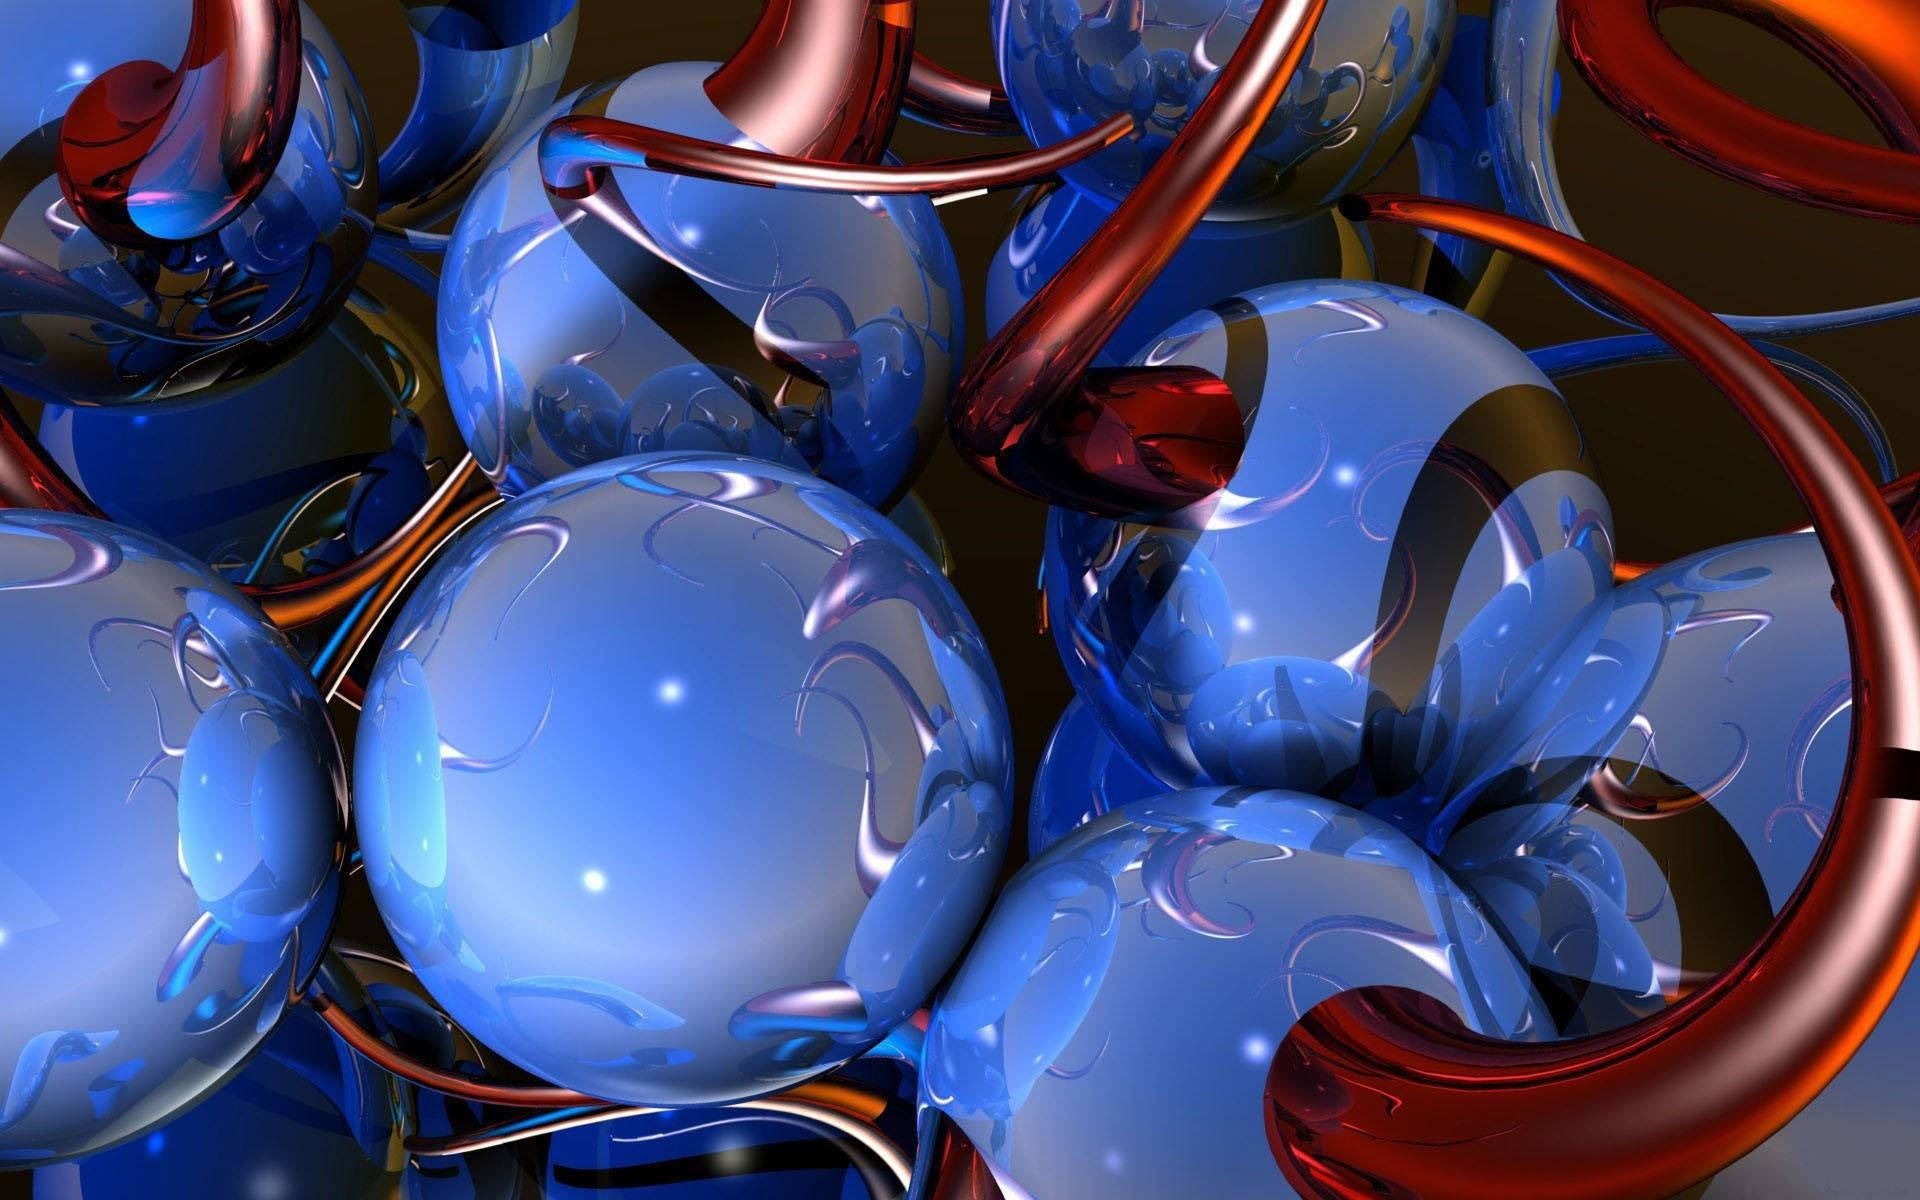 Abstract Blue Balls Animated Desktop Background